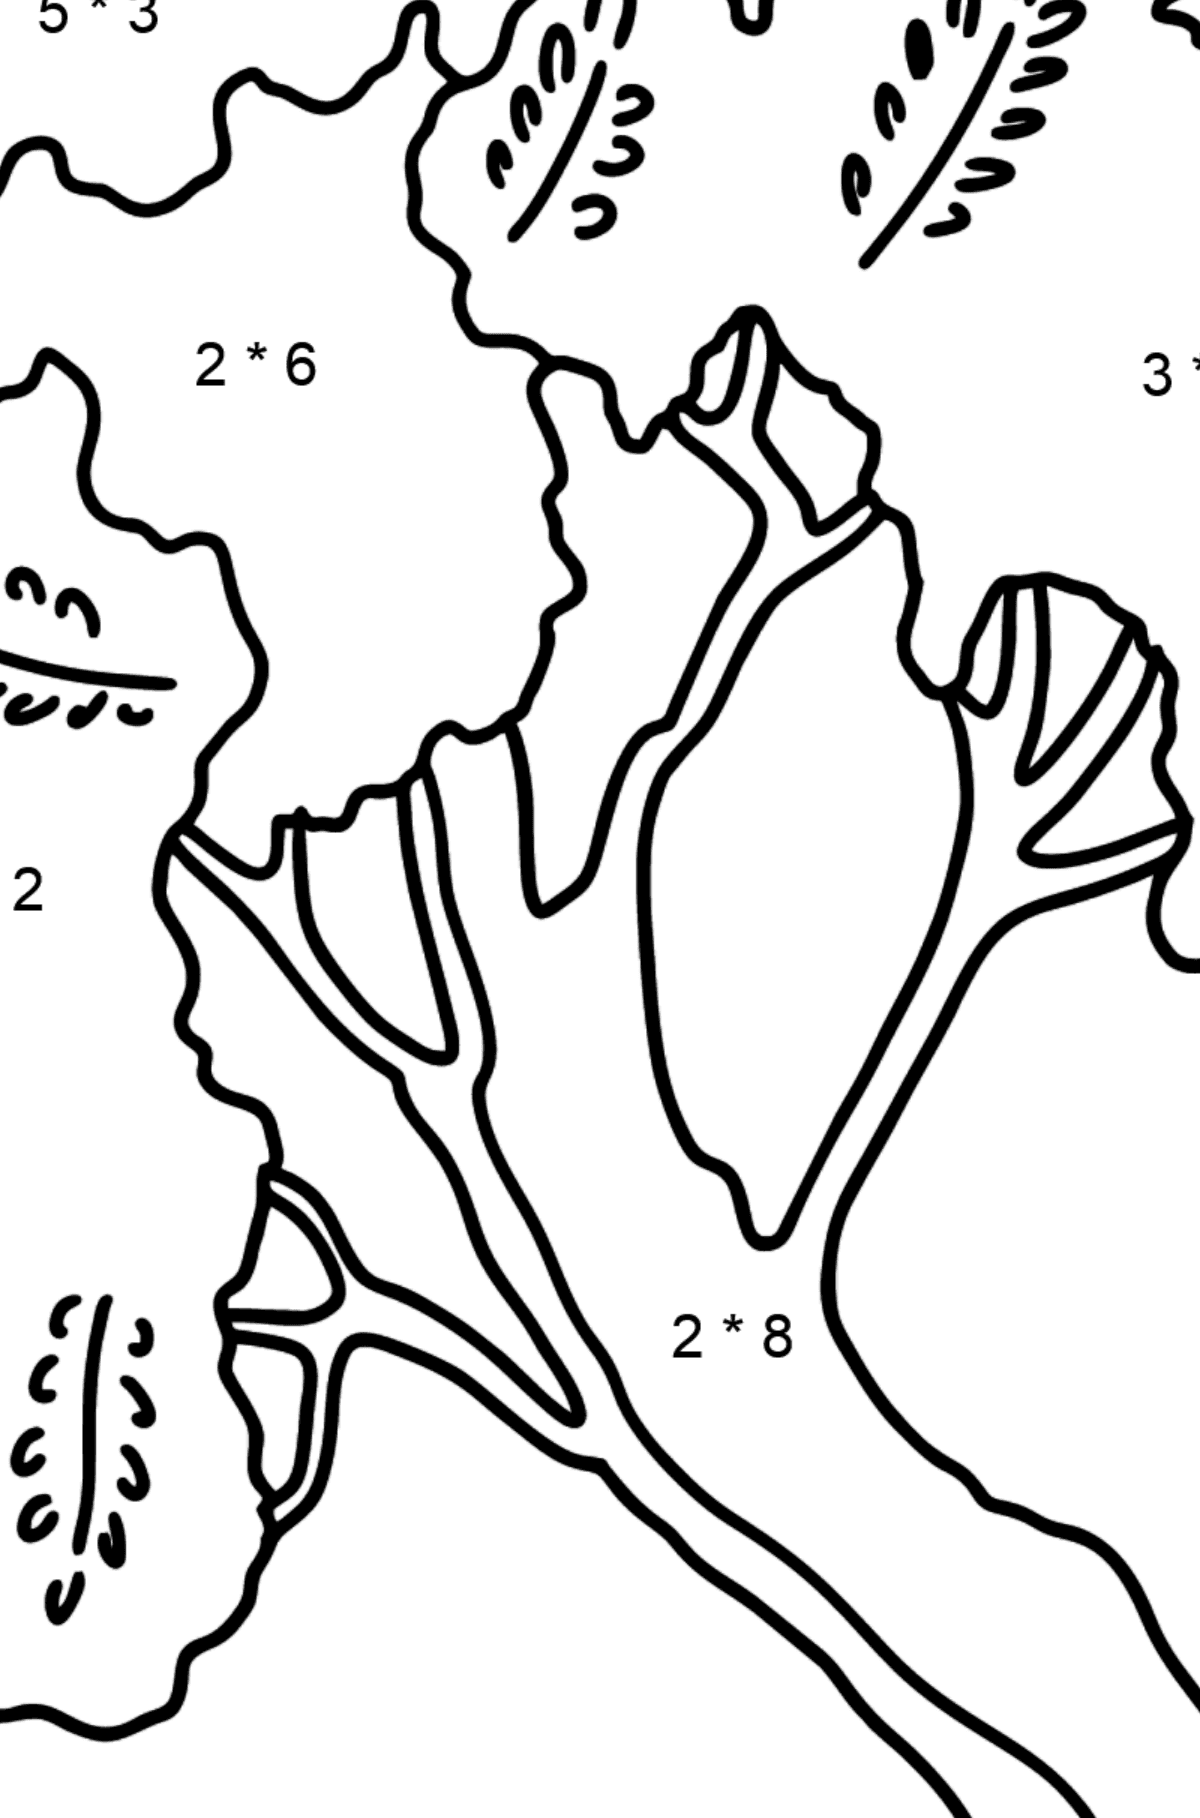 Acacia coloring page - Math Coloring - Multiplication for Kids